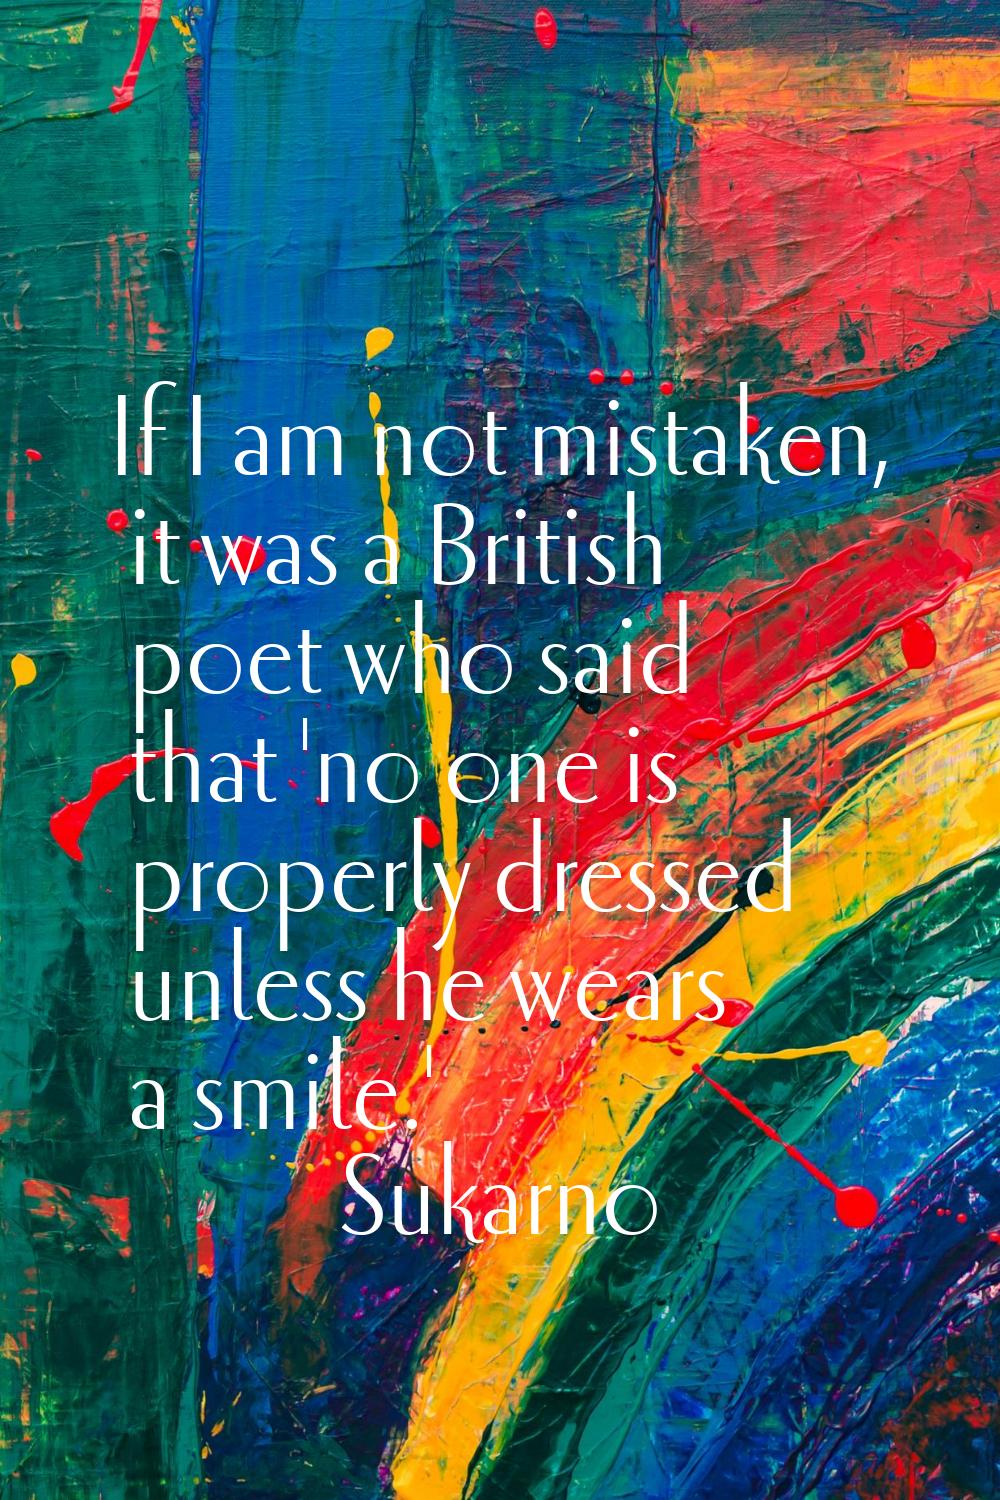 If I am not mistaken, it was a British poet who said that 'no one is properly dressed unless he wea